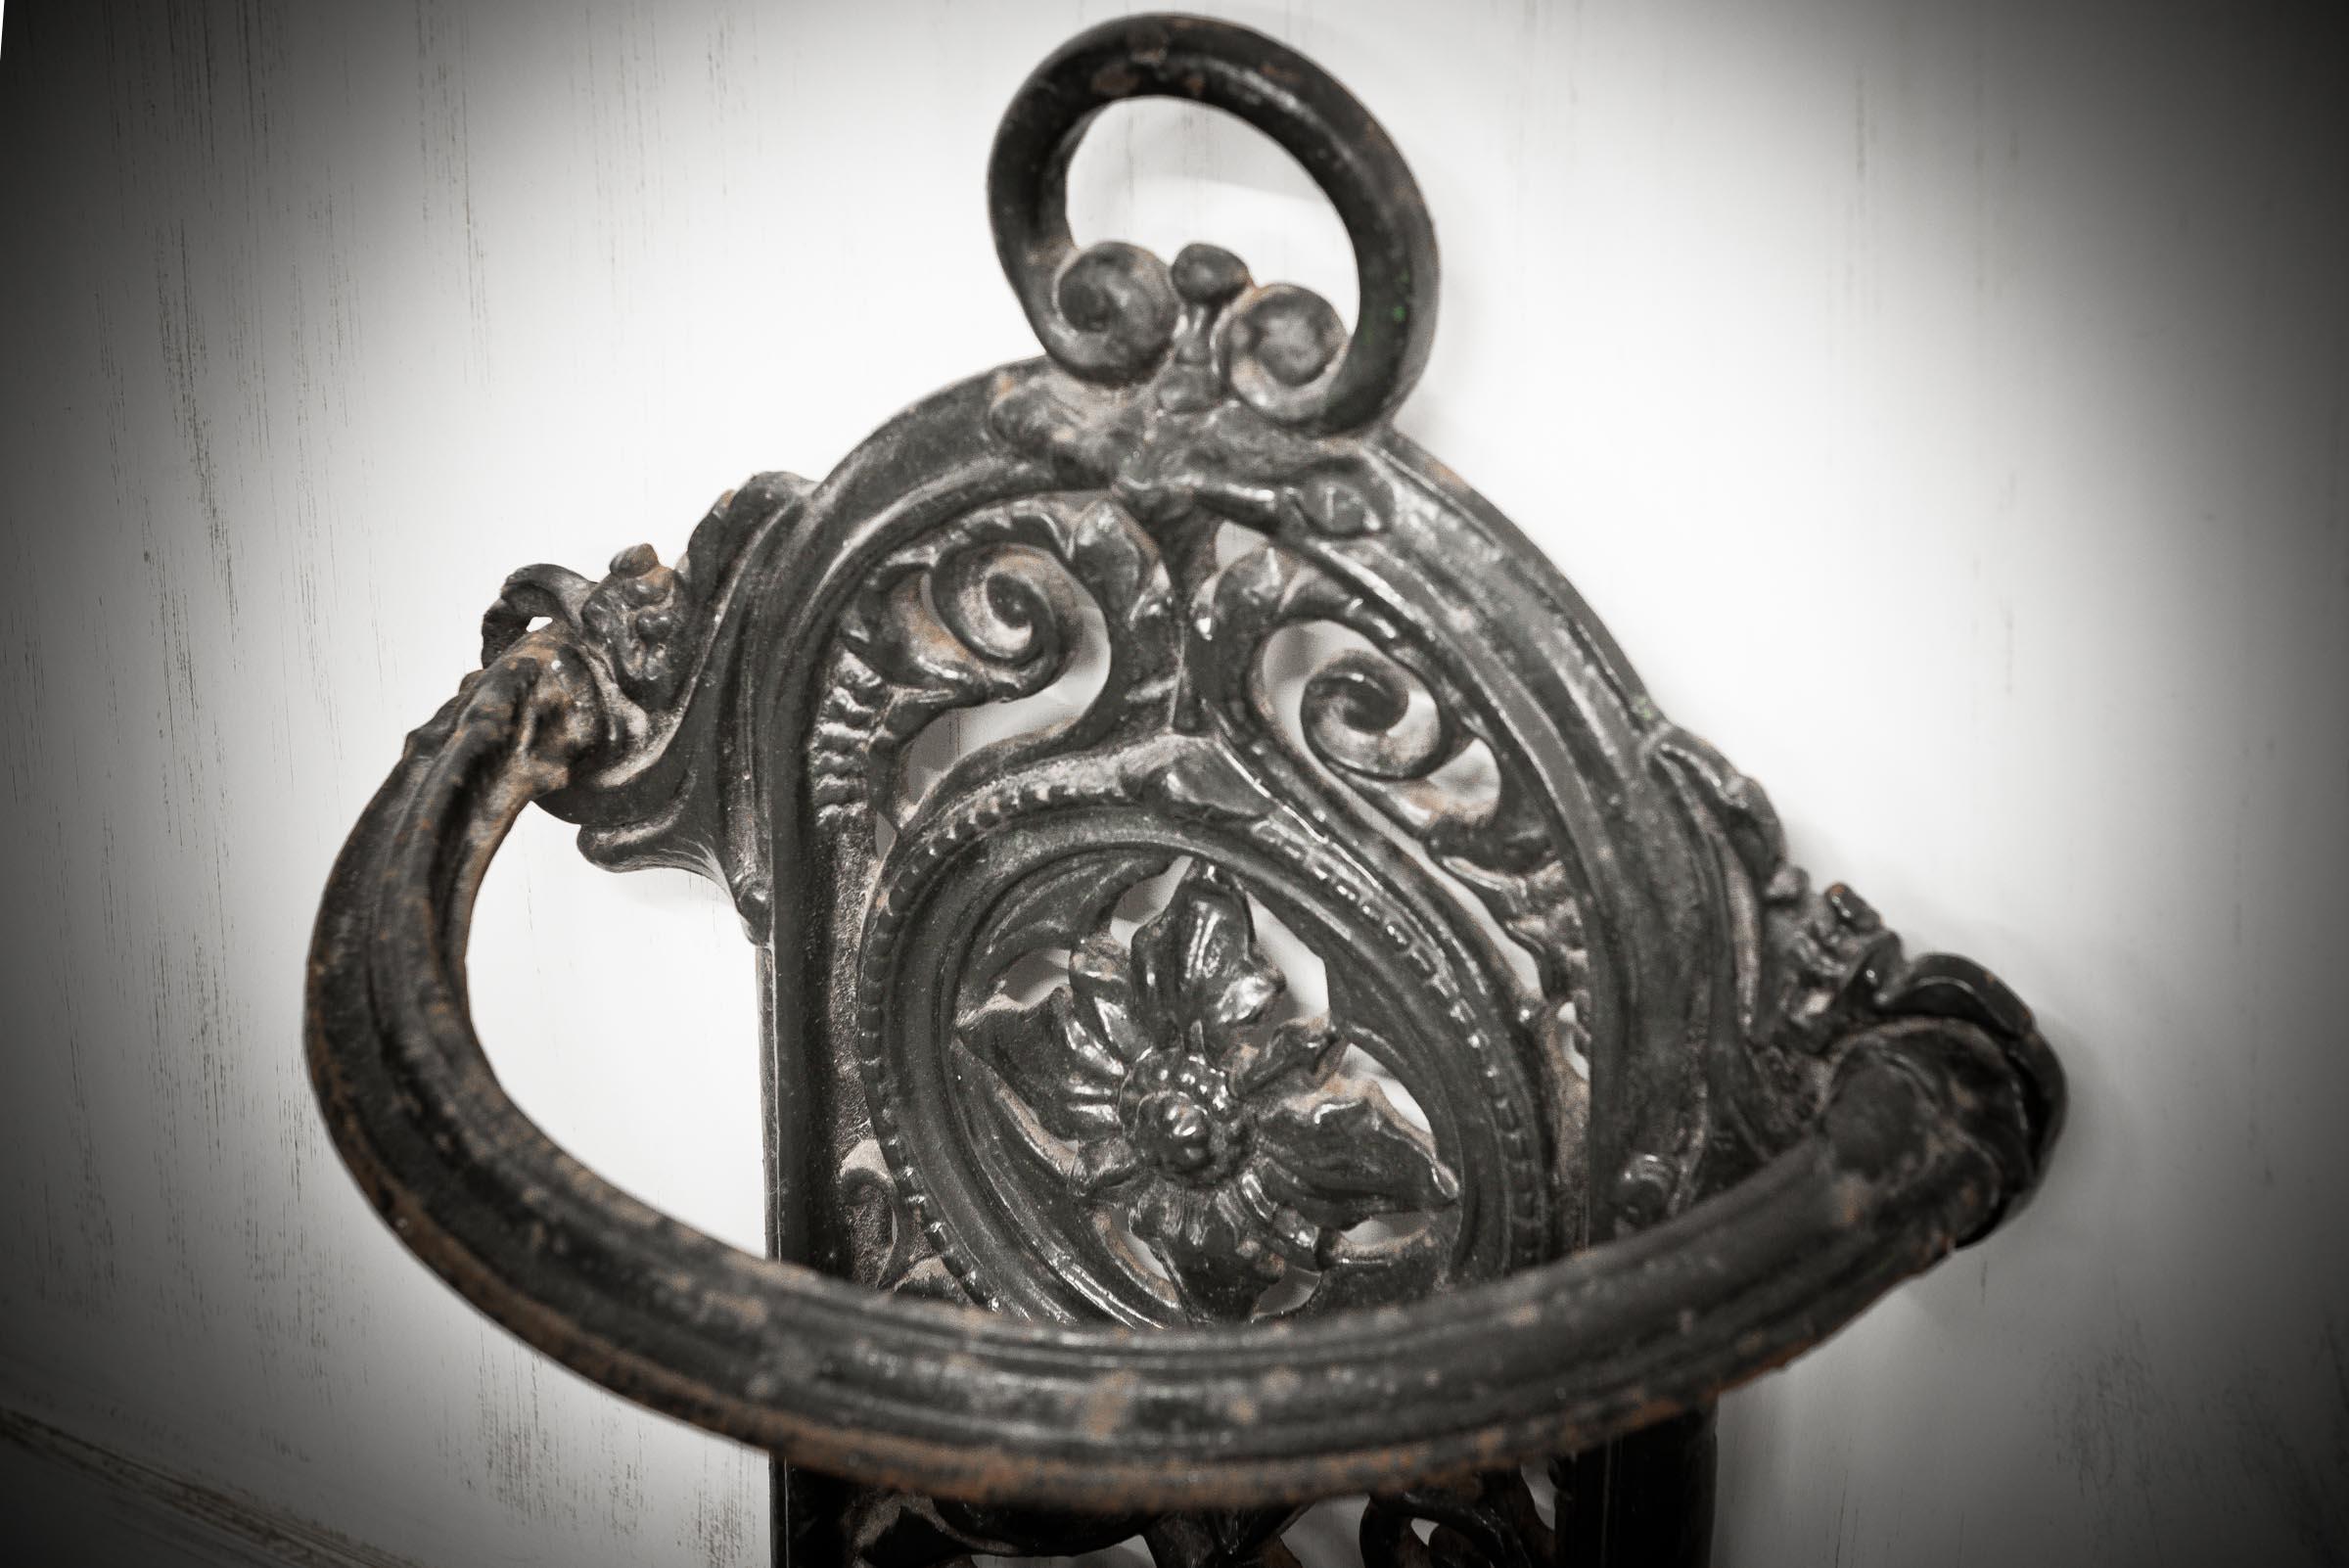 Beautiful umbrella stand made from cast iron which is typical of the Victorian era. The stand is finished with swirled designs leading down to a half crescent drip tray.